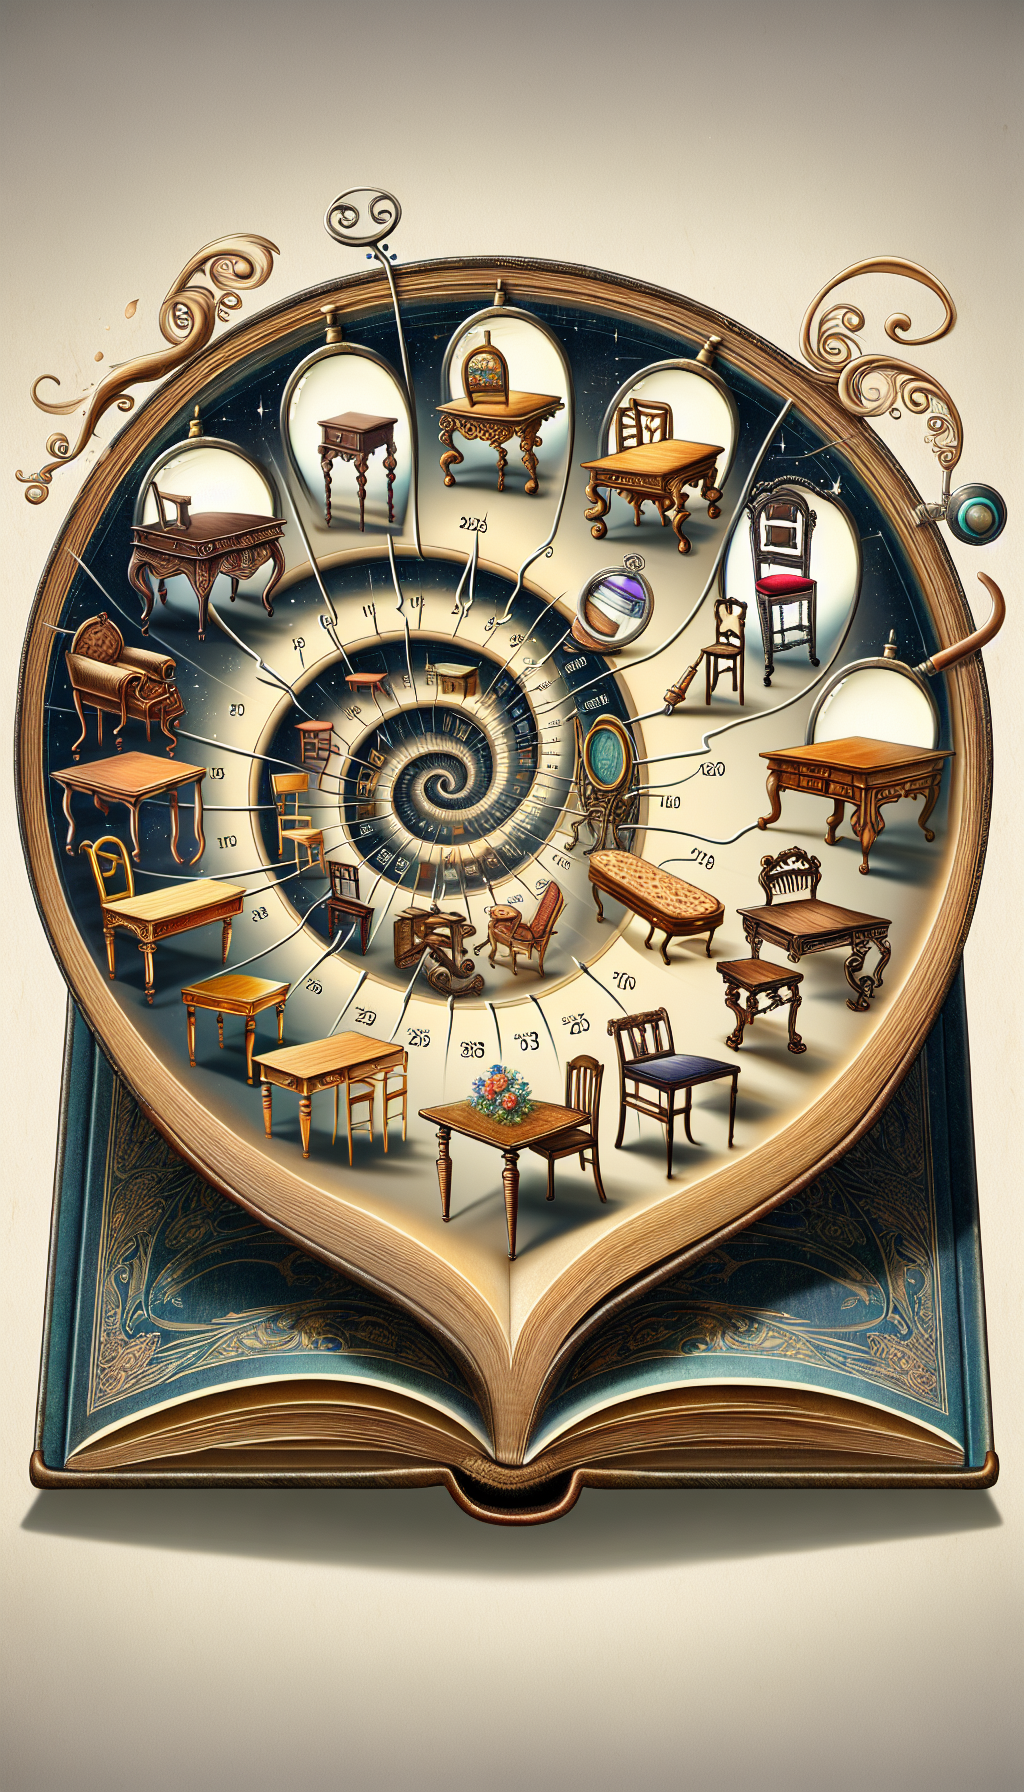 A whimsical illustration depicts a stream of various antique dining tables flowing from an open, ornate storybook. Each table, from Victorian to Art Deco, progressively transitions in style along a spiral timeline that loops around an hourglass. A magnifying glass hovers above, highlighting the distinct features that pinpoint their historical periods, seamlessly blending education with visual enchantment.